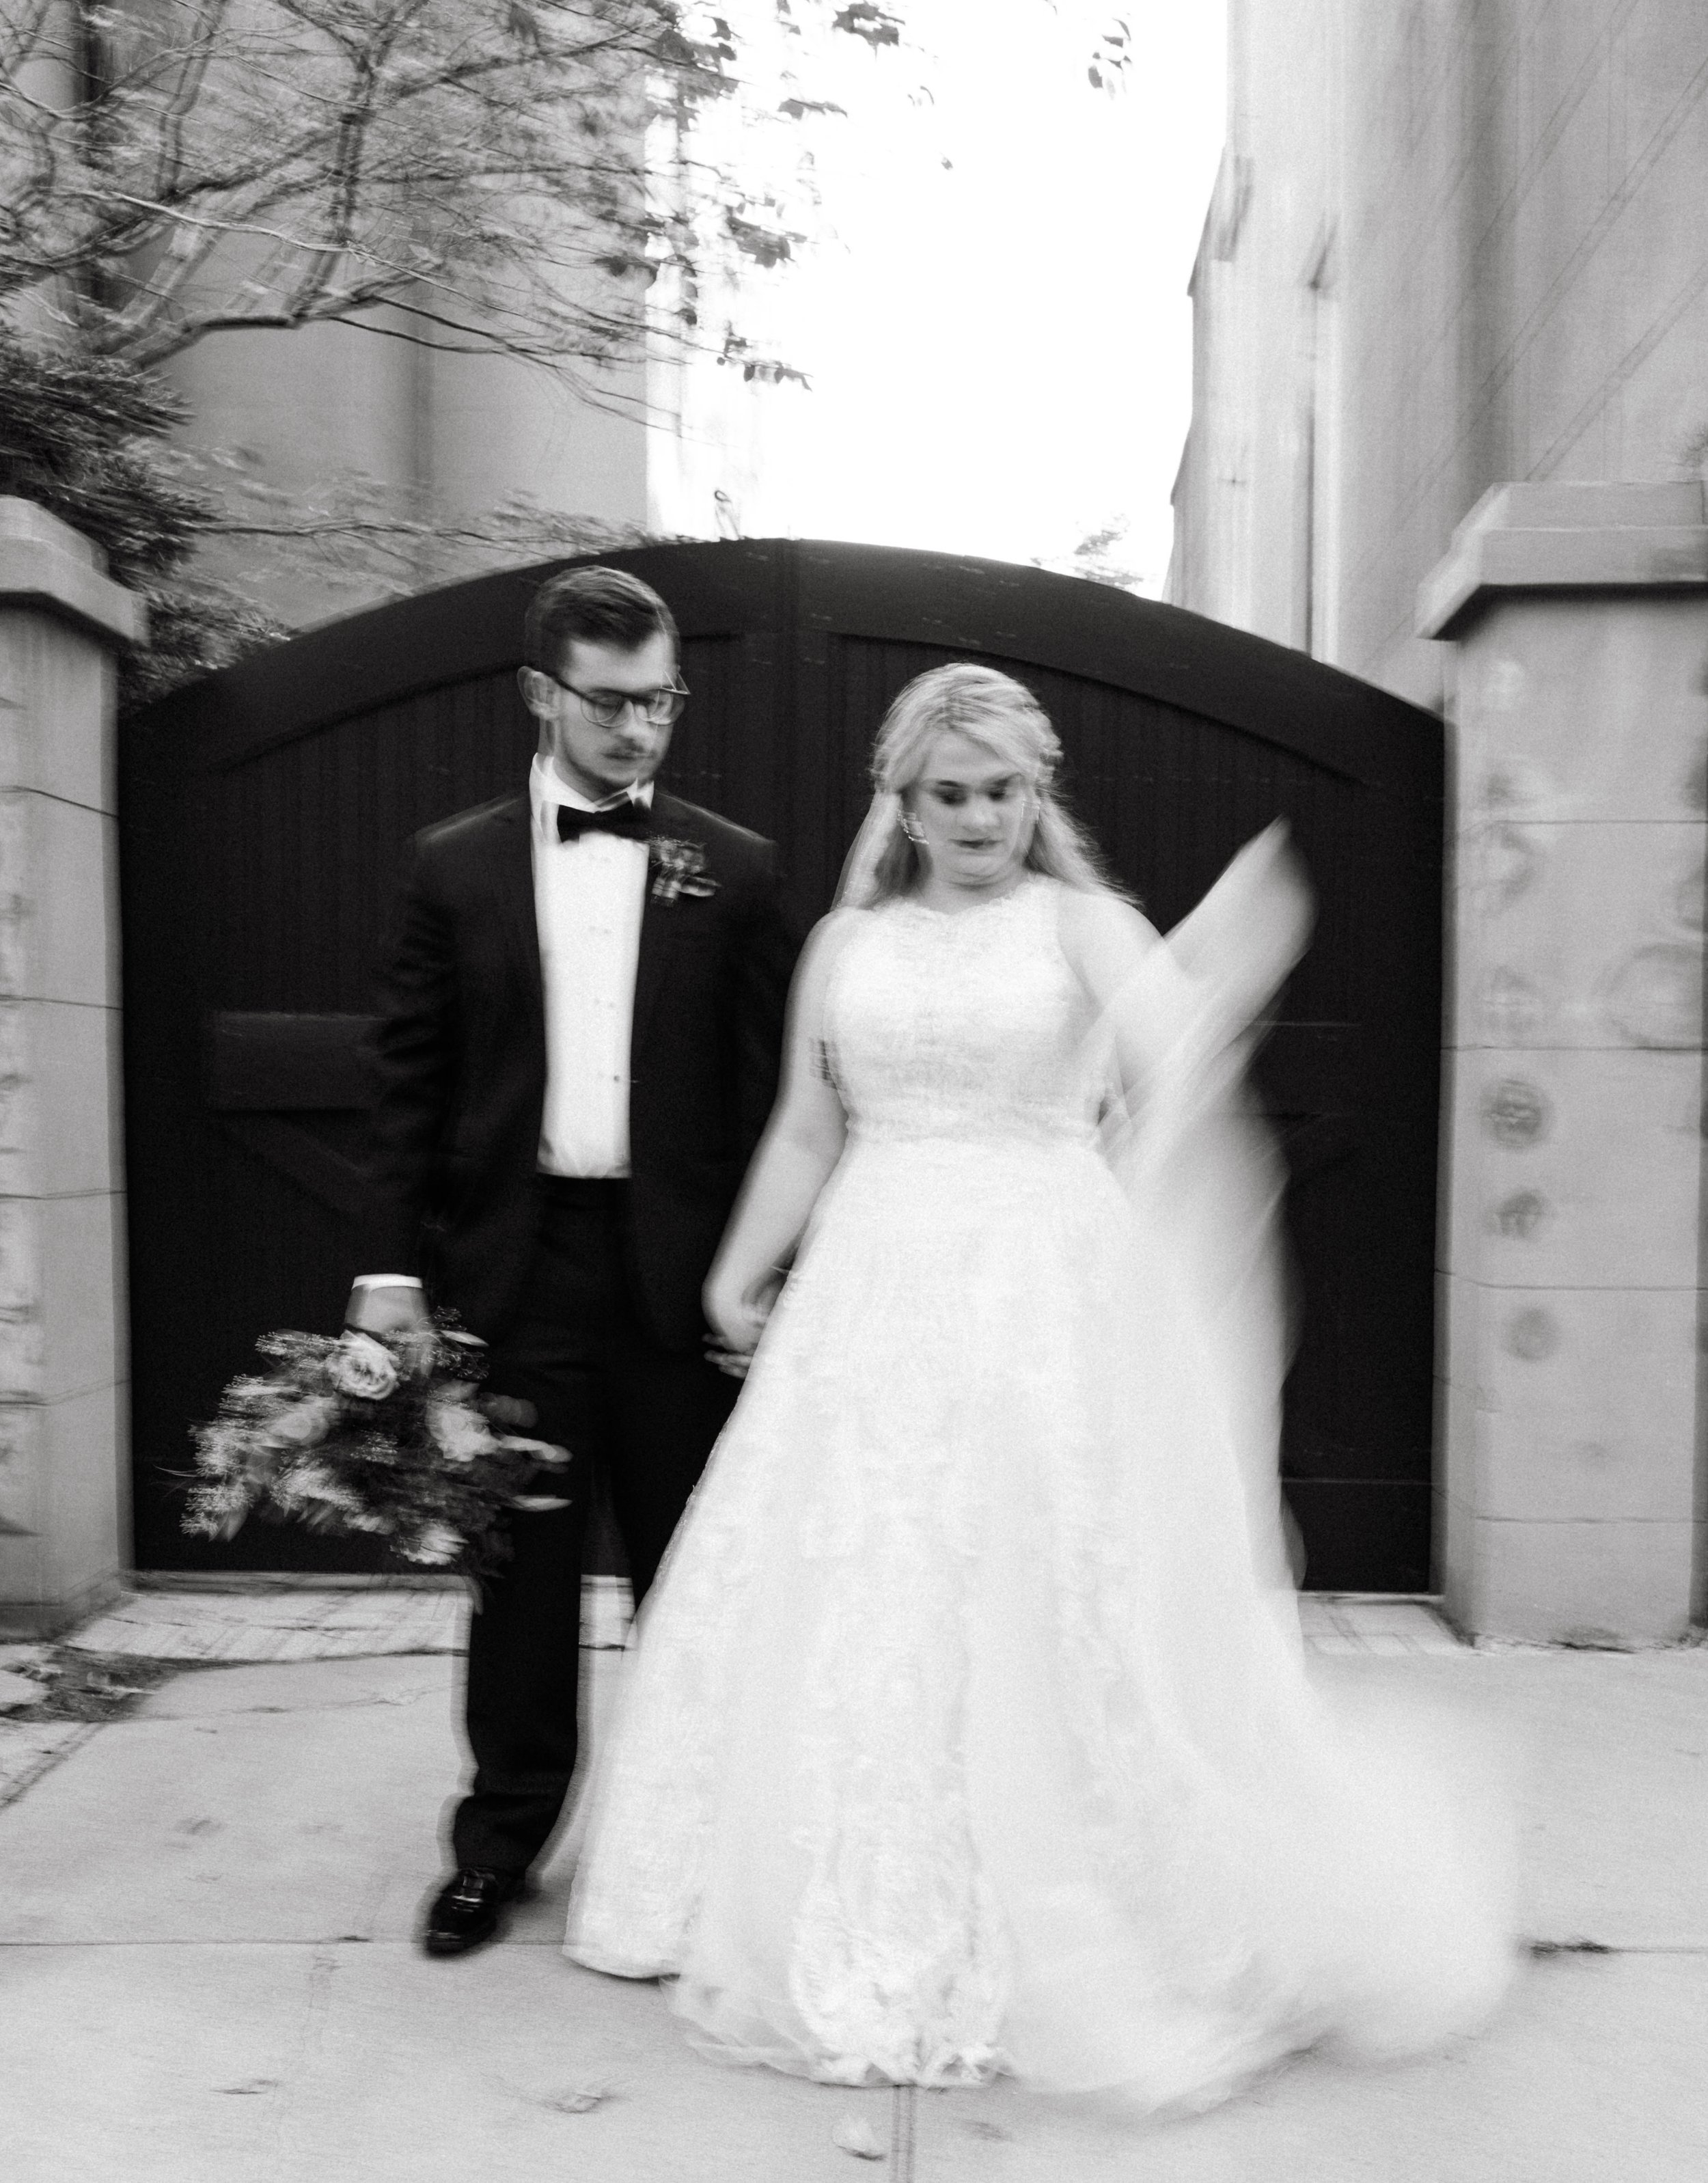 Ivory-and-beau-bride-ansley-bought-sparkly-and-traditional-highneck-ballgown-at-savannah-bridal-shop-gets-married-at-cathedral-with-the-help-of-ivory-and-beau-who-created-floral-peices-for-the-ceremony-and-reception-in-their-savannah-florwer-shop-6.jpg